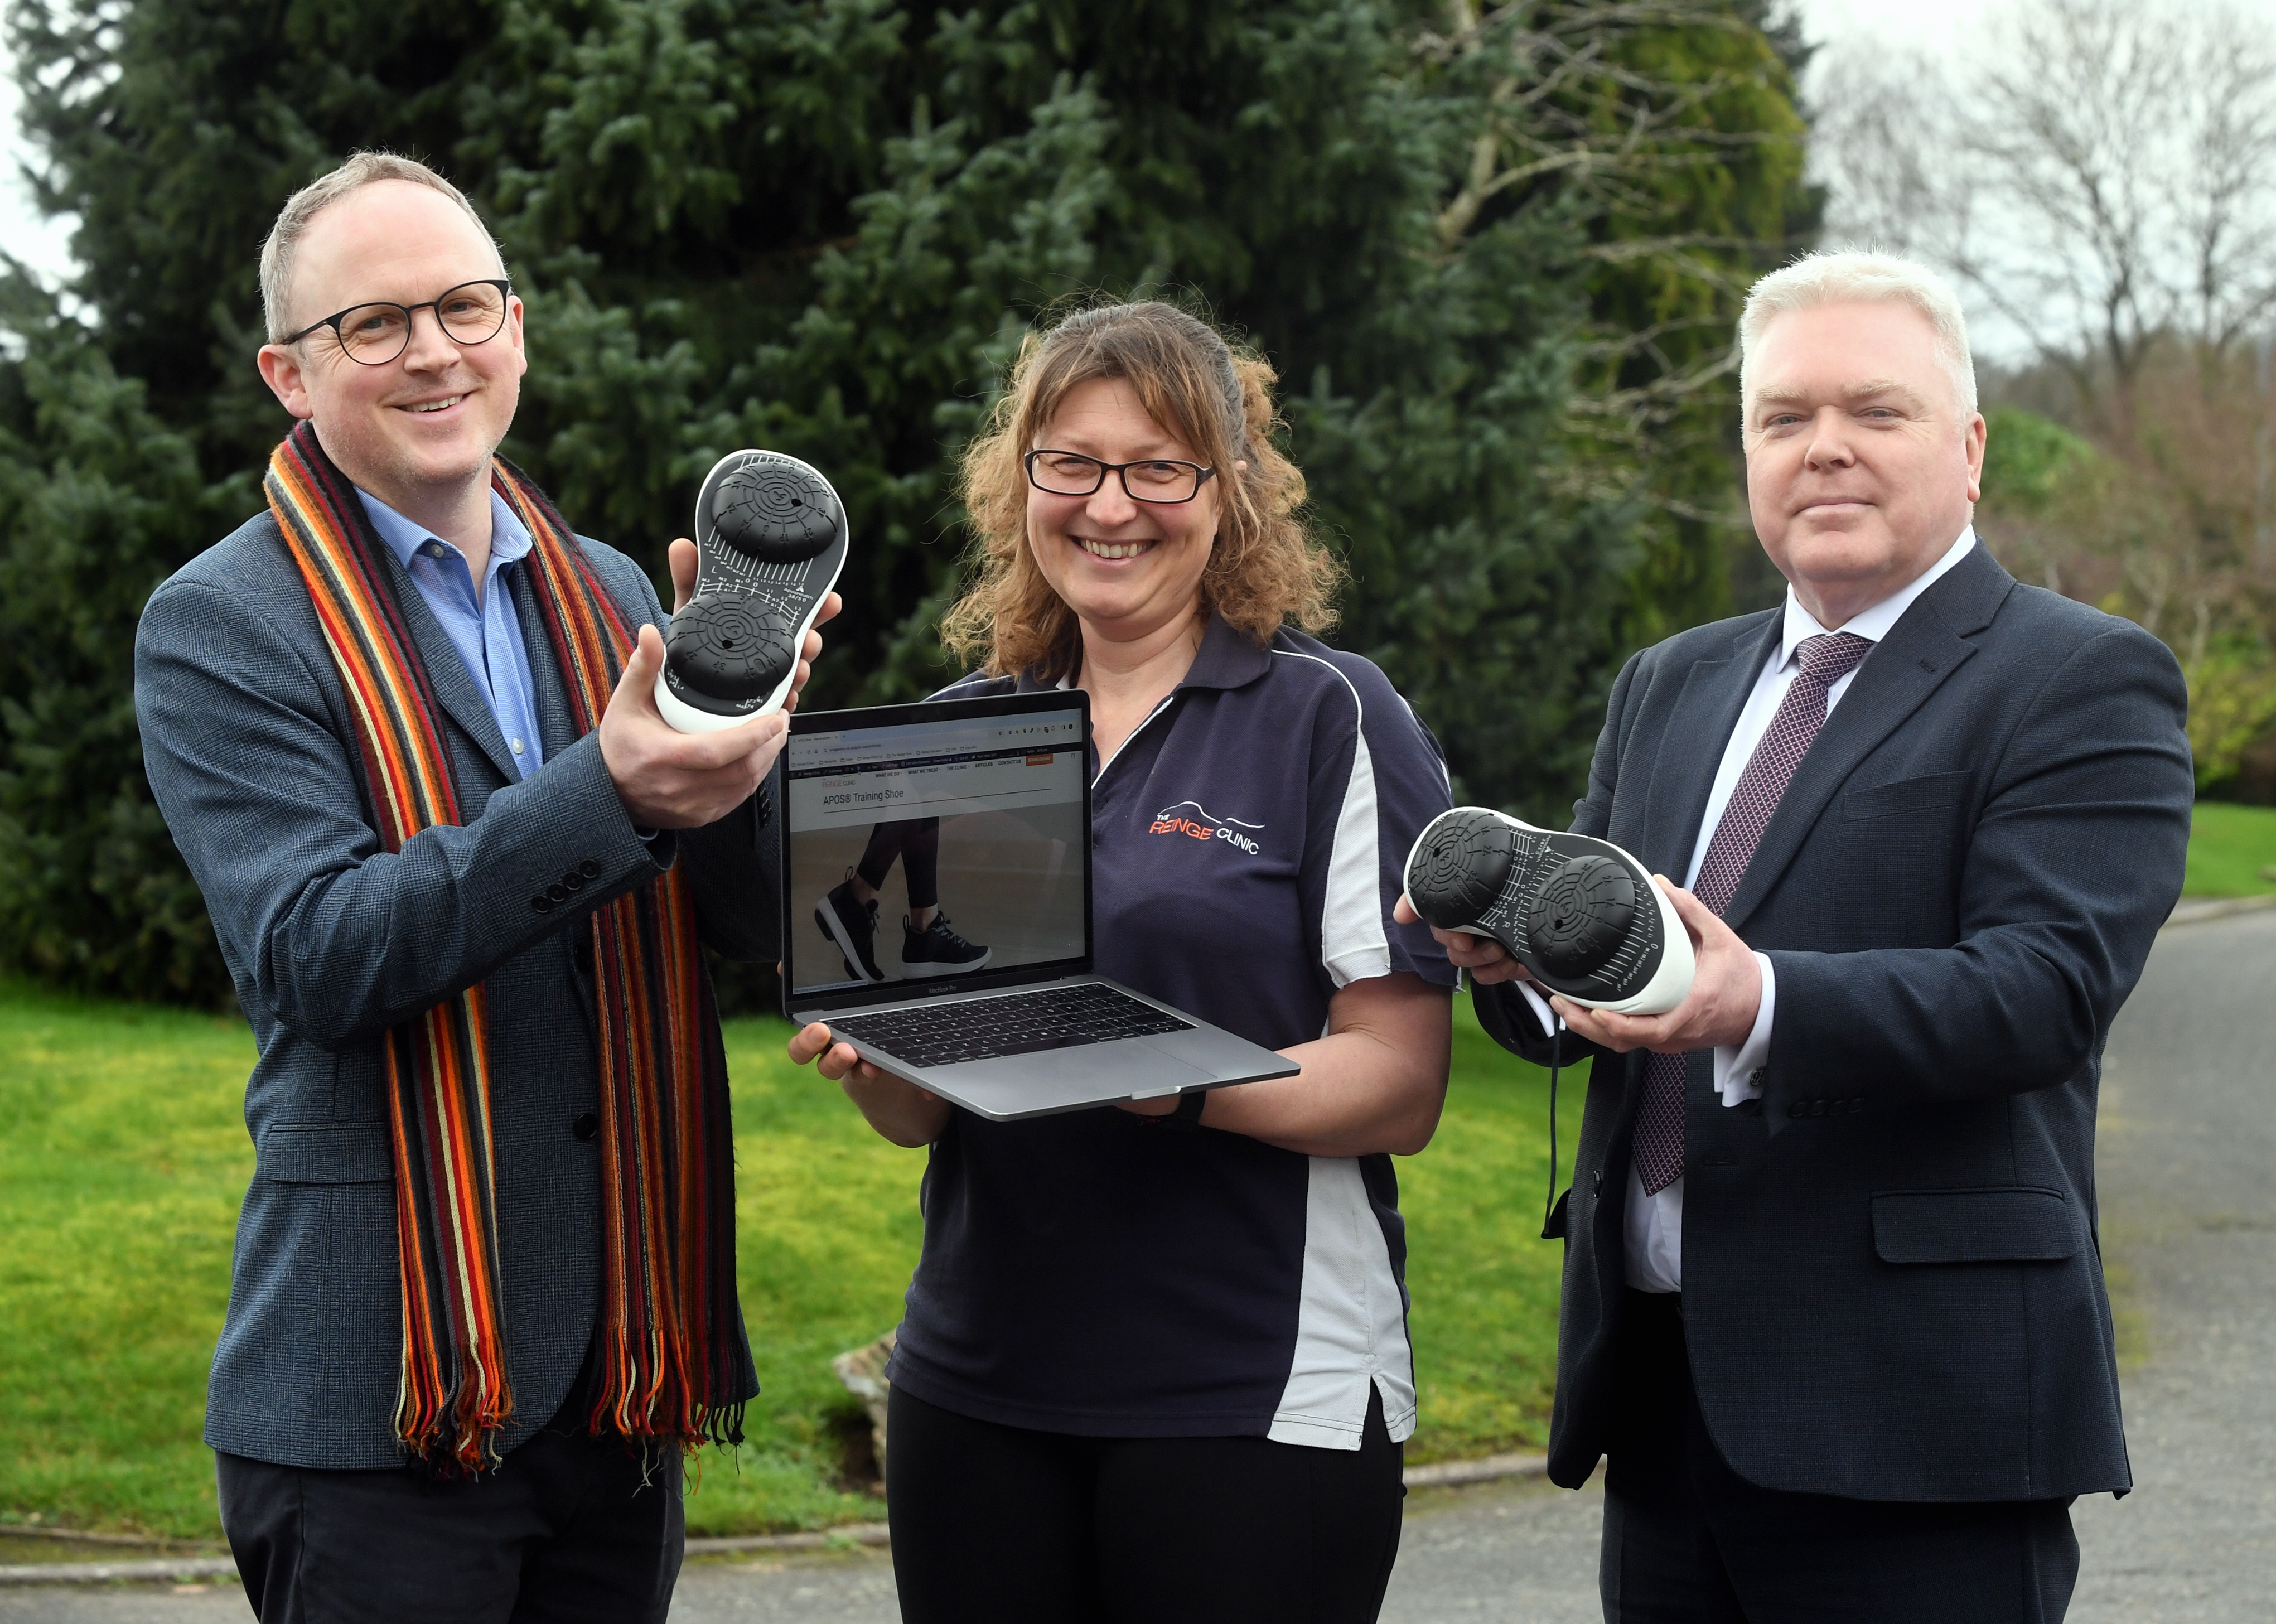 Kenilworth physio clinic selling shoe helping prevent knee and hip replacements set for growth